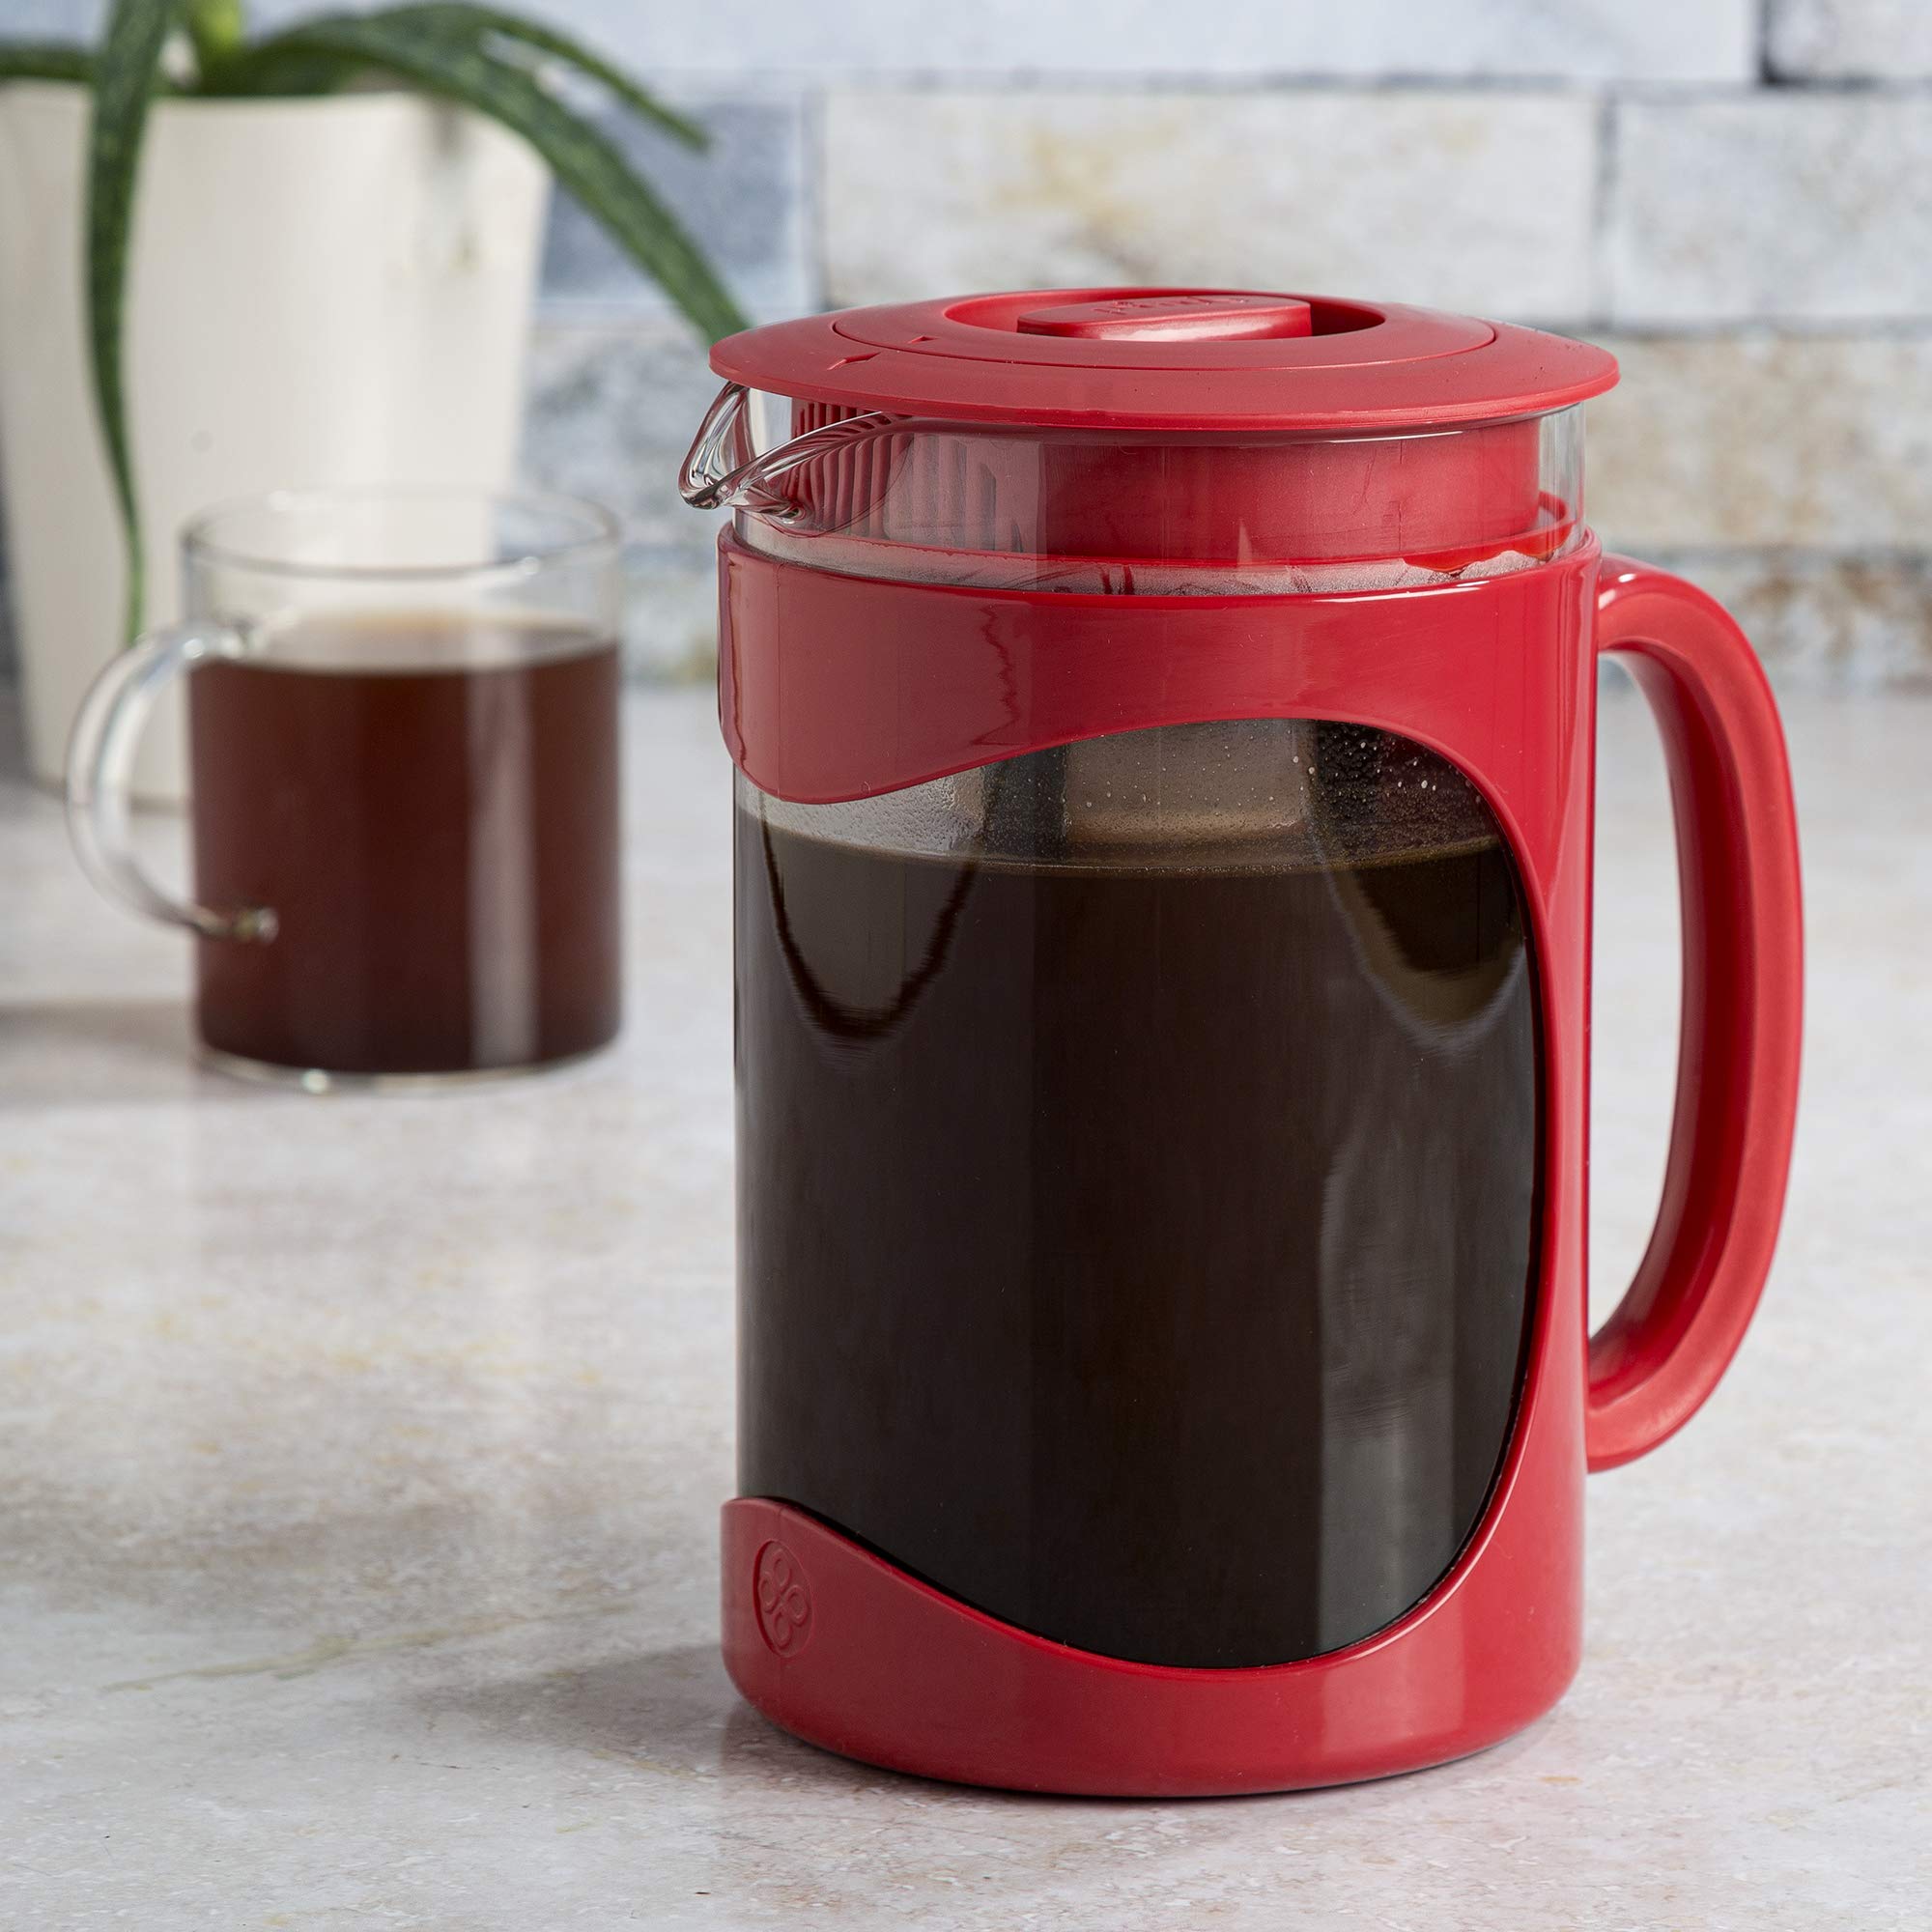 Primula Burke Deluxe Cold Brew Iced Coffee Maker, Comfort Grip Handle, Durable Glass Carafe, Removable Mesh Filter, Perfect 6 Cup Size, Dishwasher Safe, 1.6 qt, Red